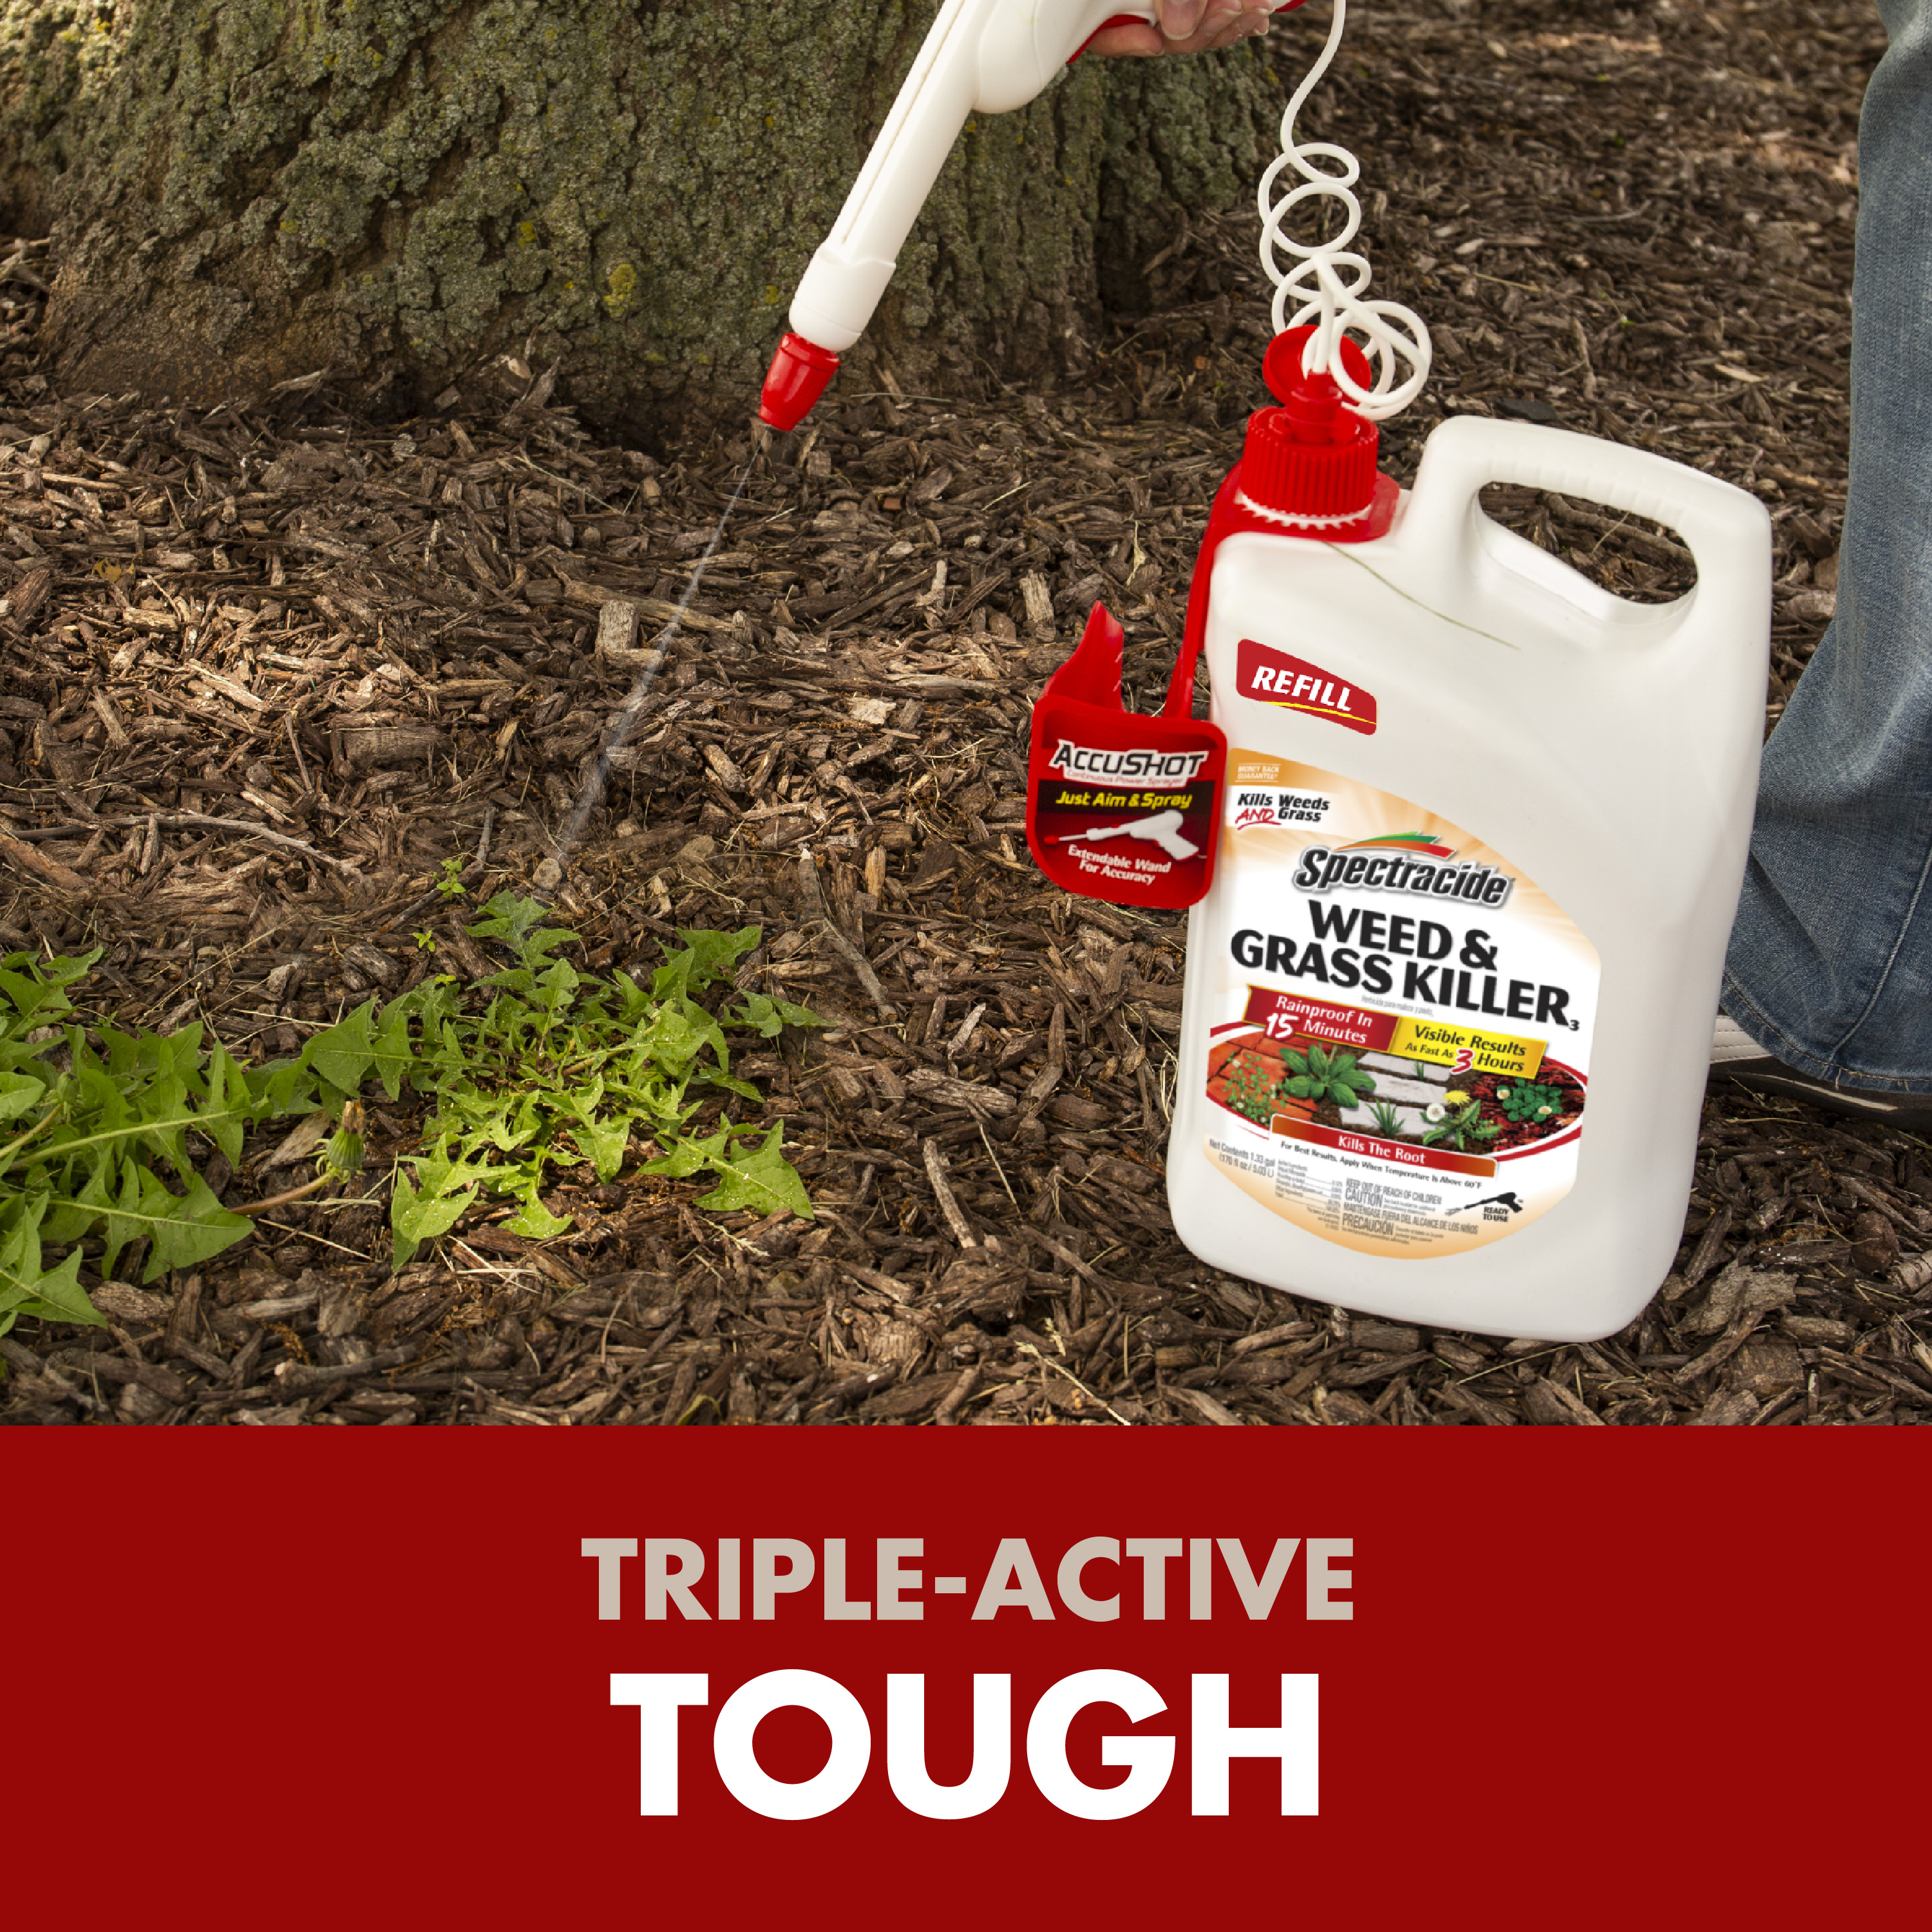 Spectracide Weed & Grass Killer (Refill), Use on Driveways, Walkways and Around Trees and Flower Beds, 1.3 Gallon - image 7 of 13